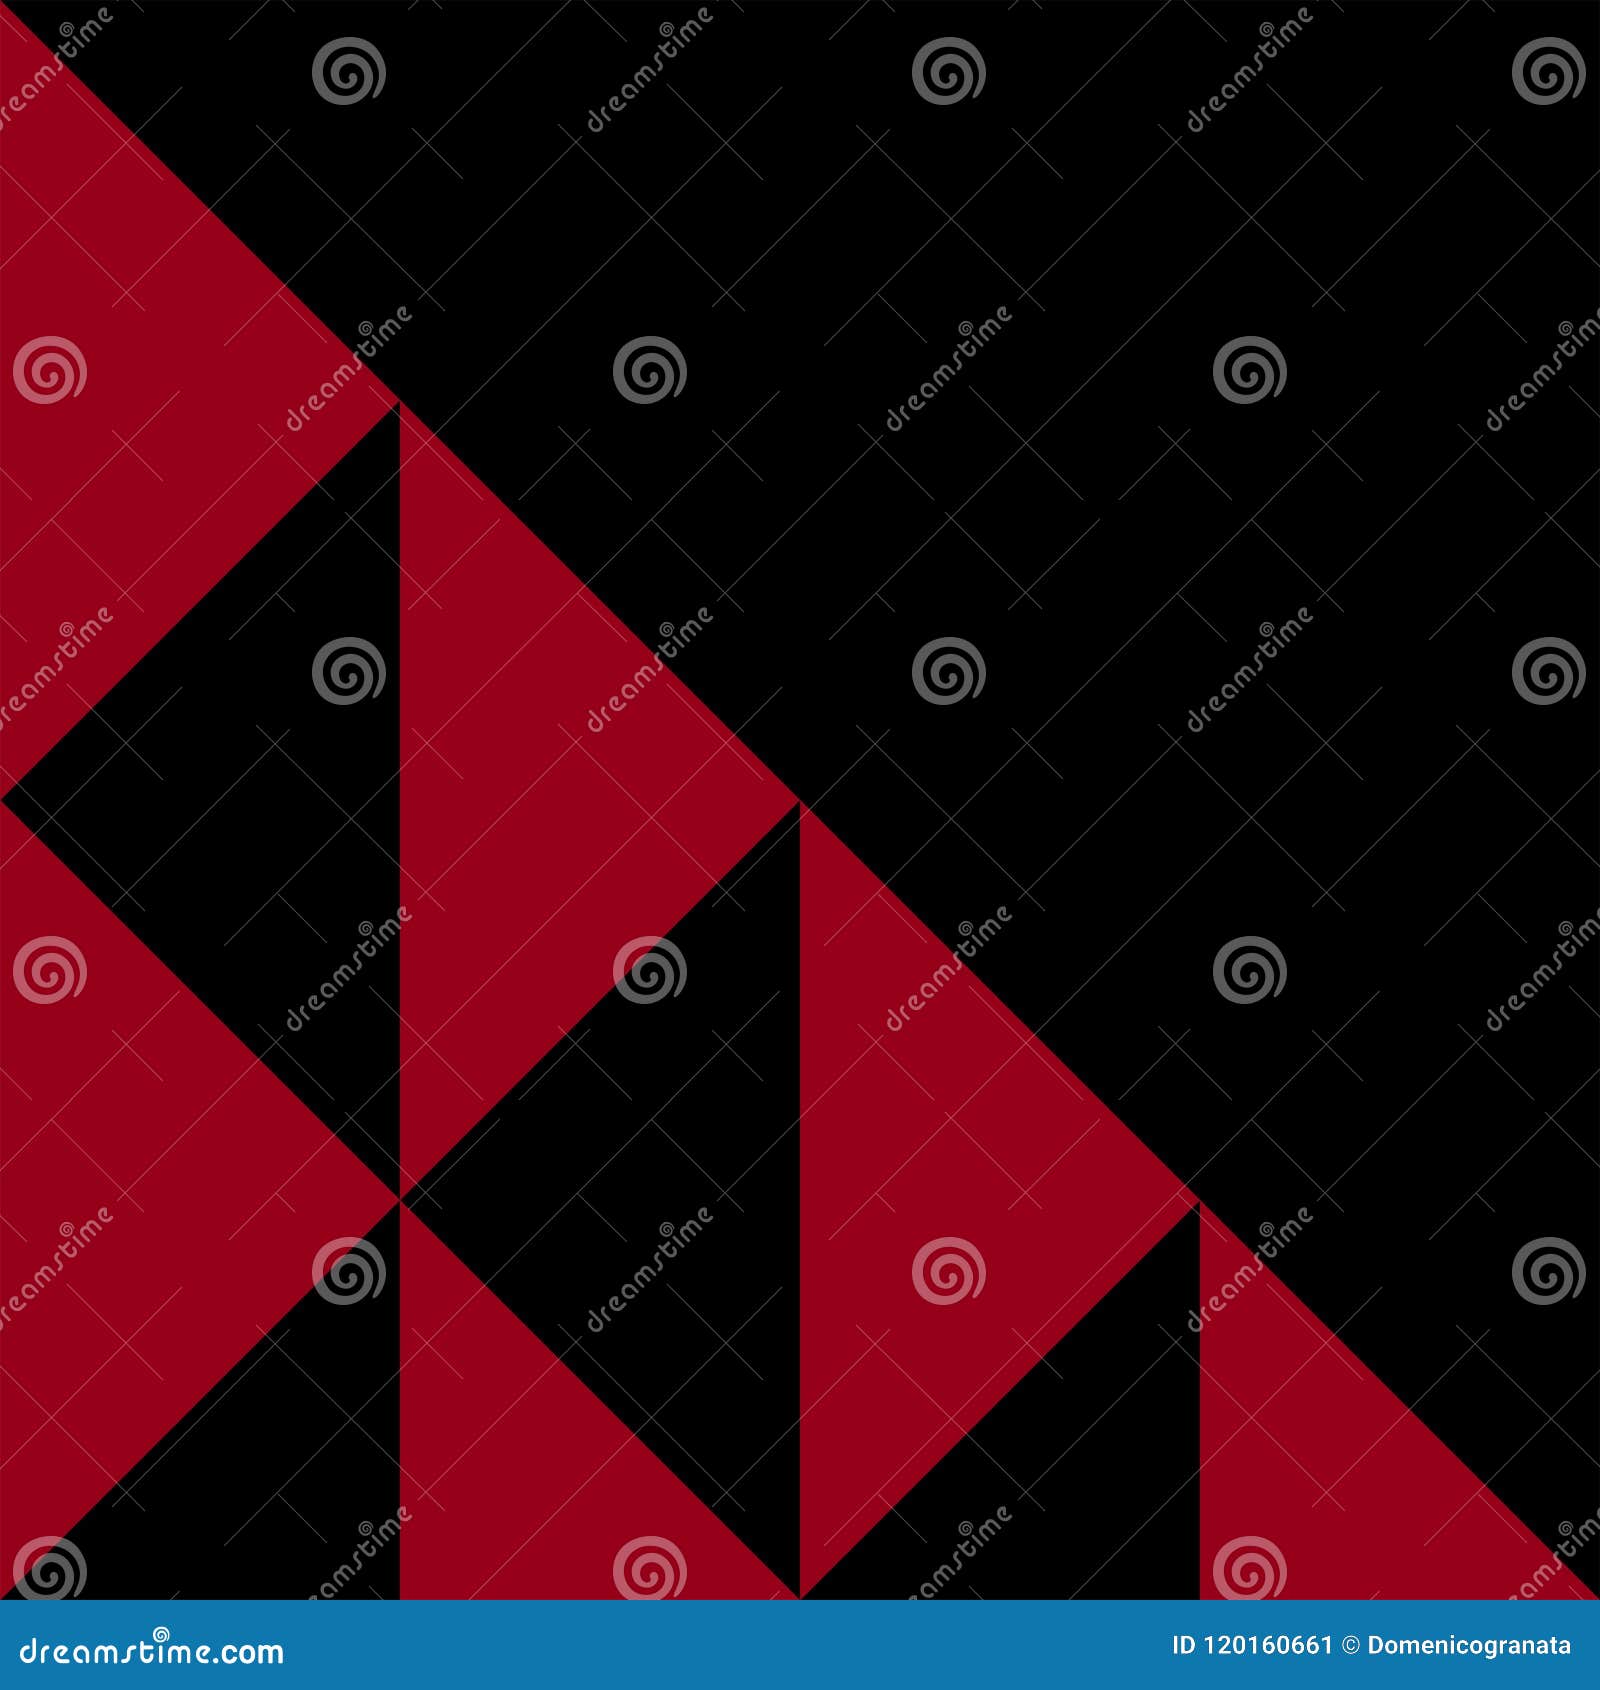 geometric vintage pattern red and balck